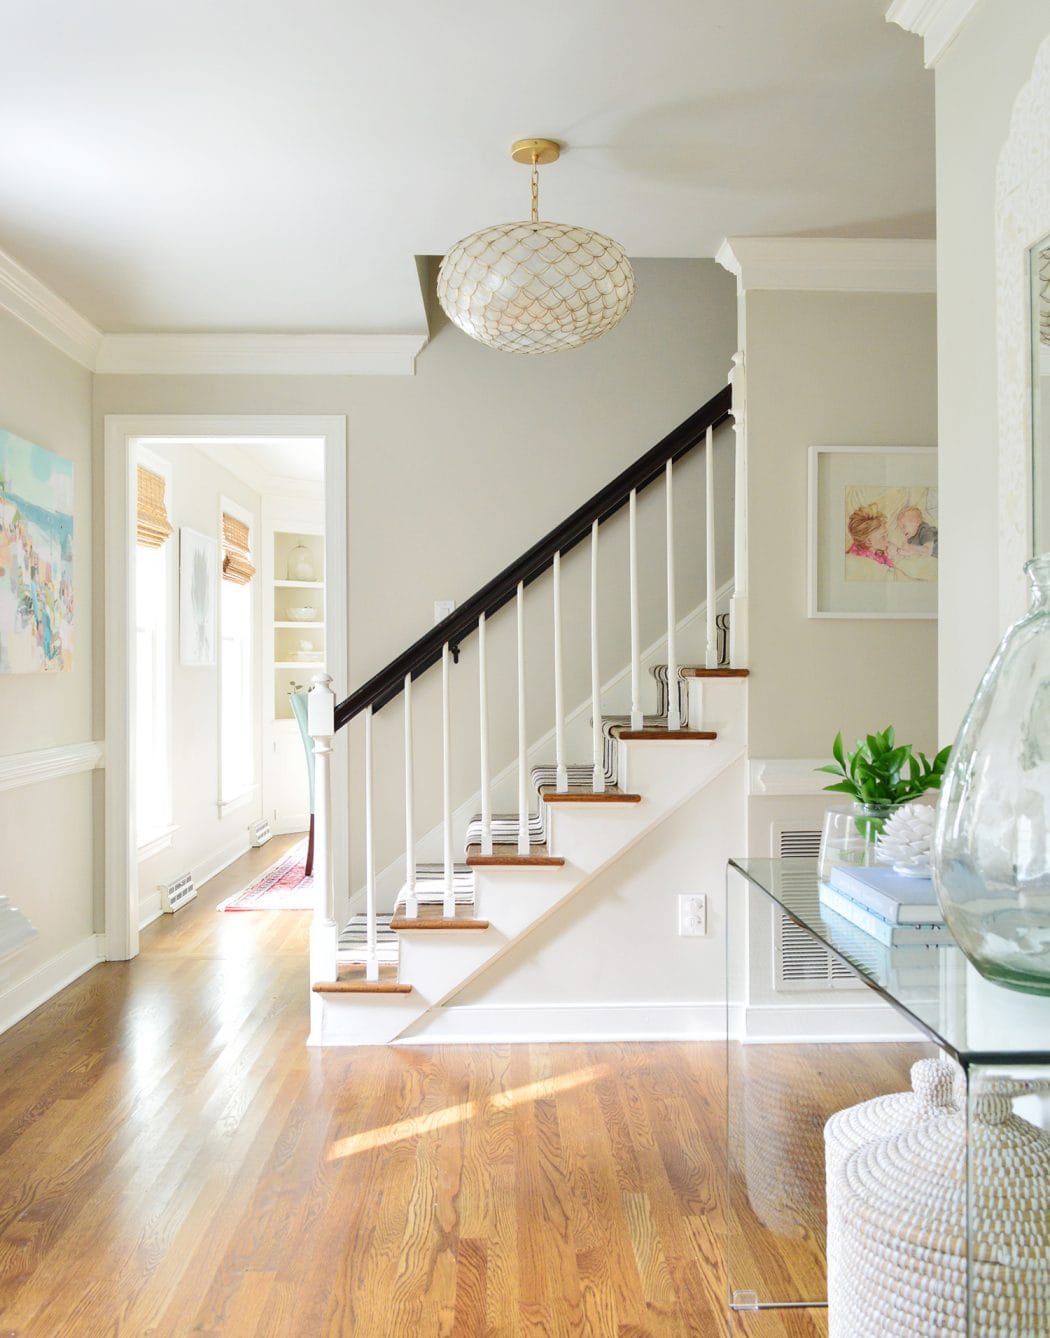 Large, bright foyer painted with Benjamin Moore Edgecomb Gray with a beautiful gold, round light fixture next to the staircase.